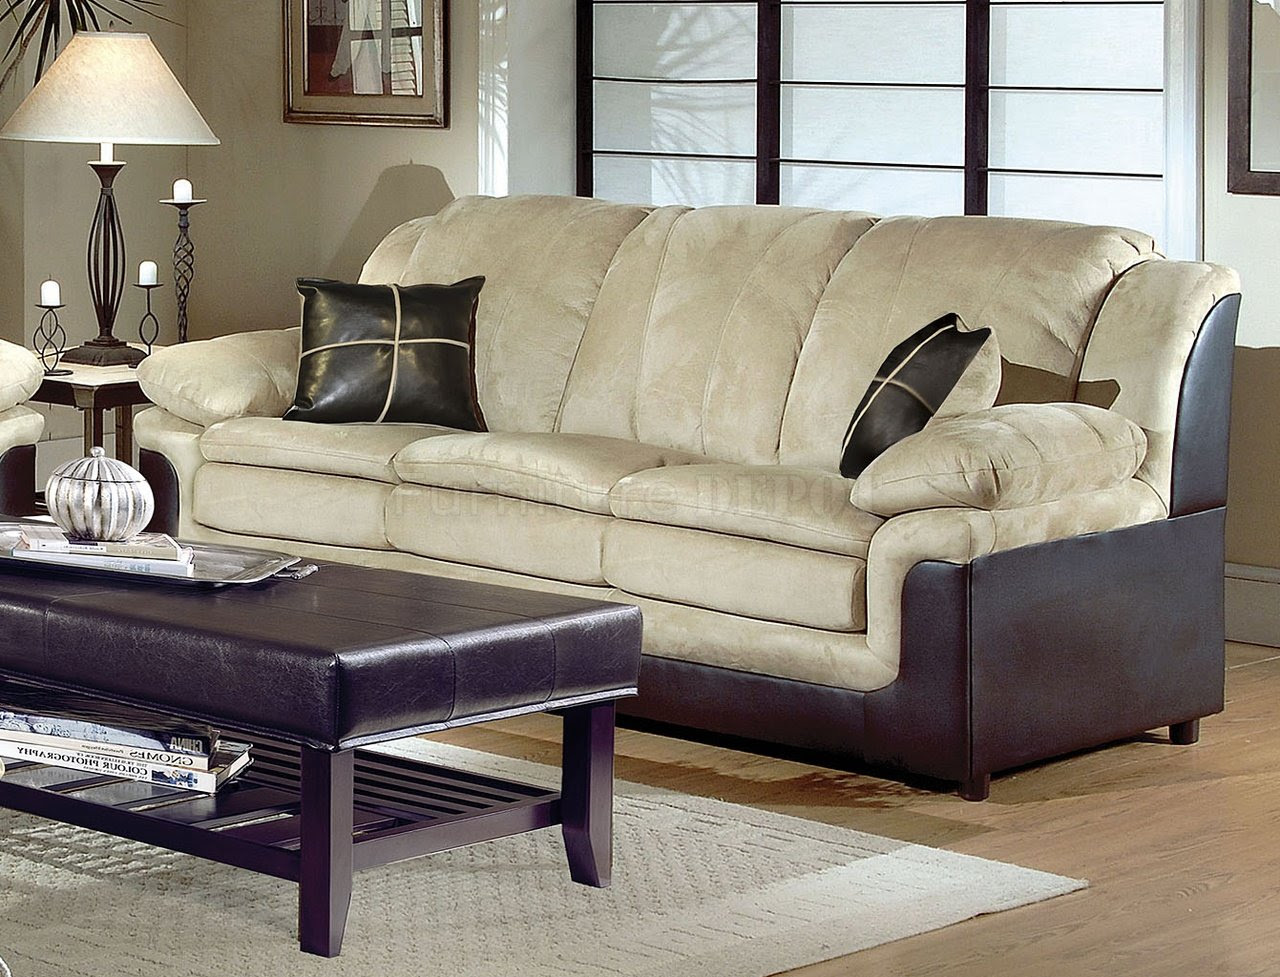 40+ Breathtaking Collections Of Leather Living Room Furniture Sets